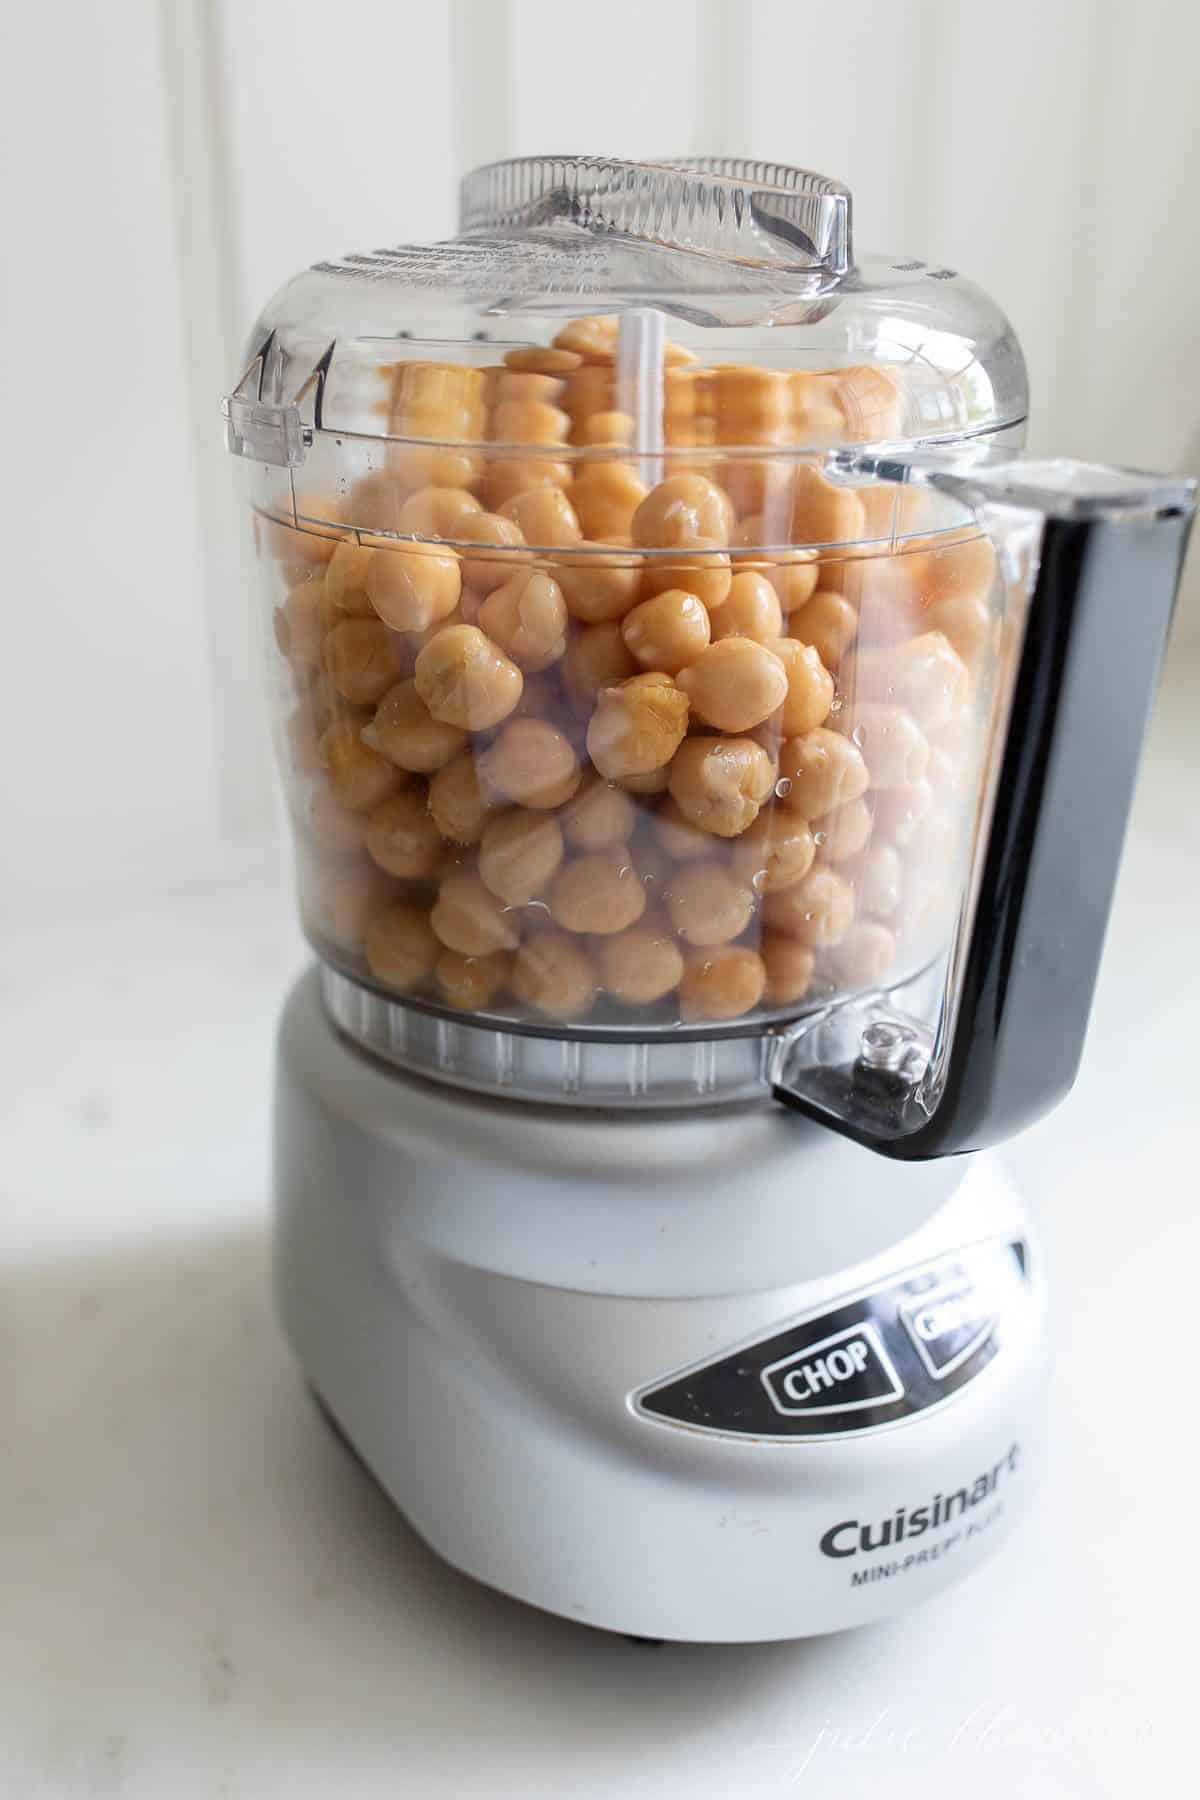 A food processor full of ingredients to make homemade hummus.